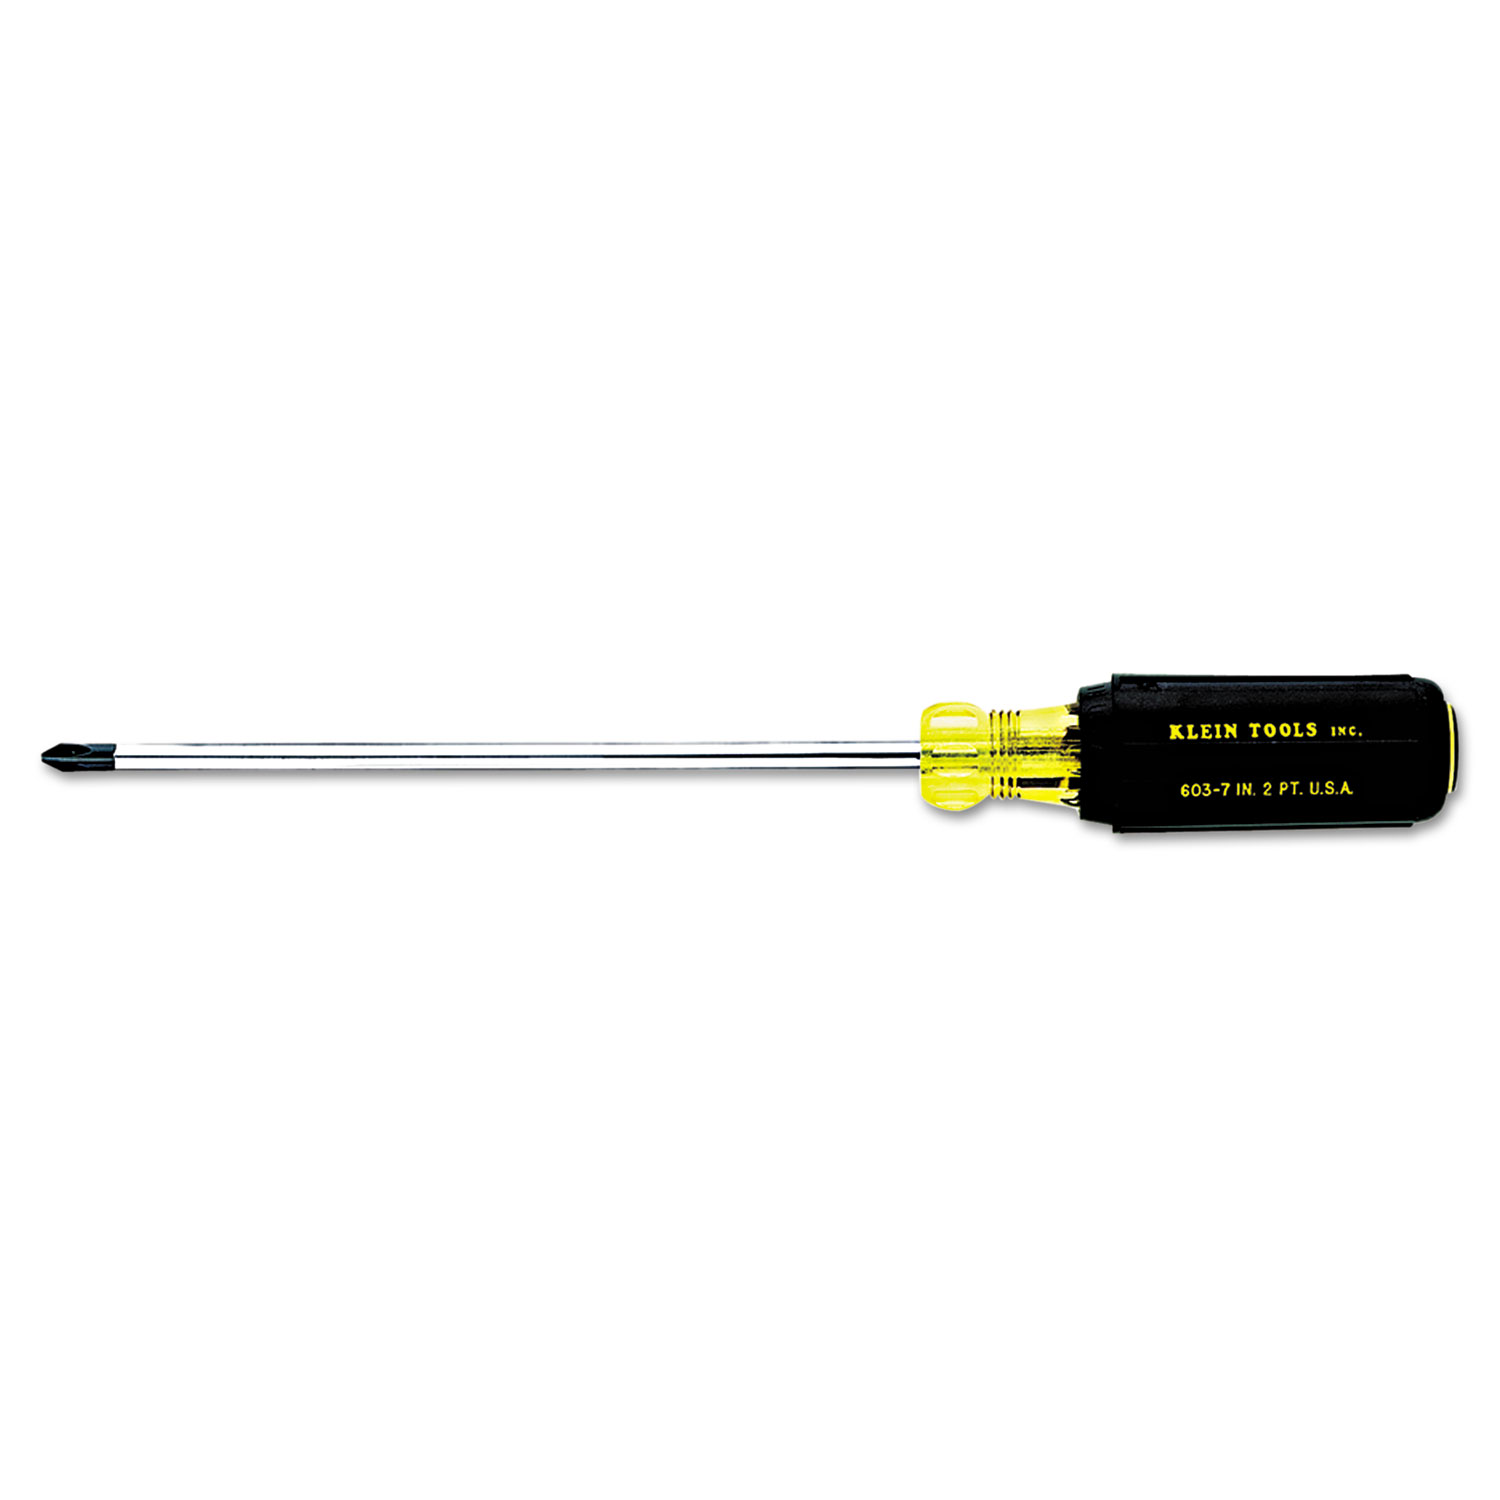 Profilated Phillips-Tip Cushion-Grip Screwdriver, #2